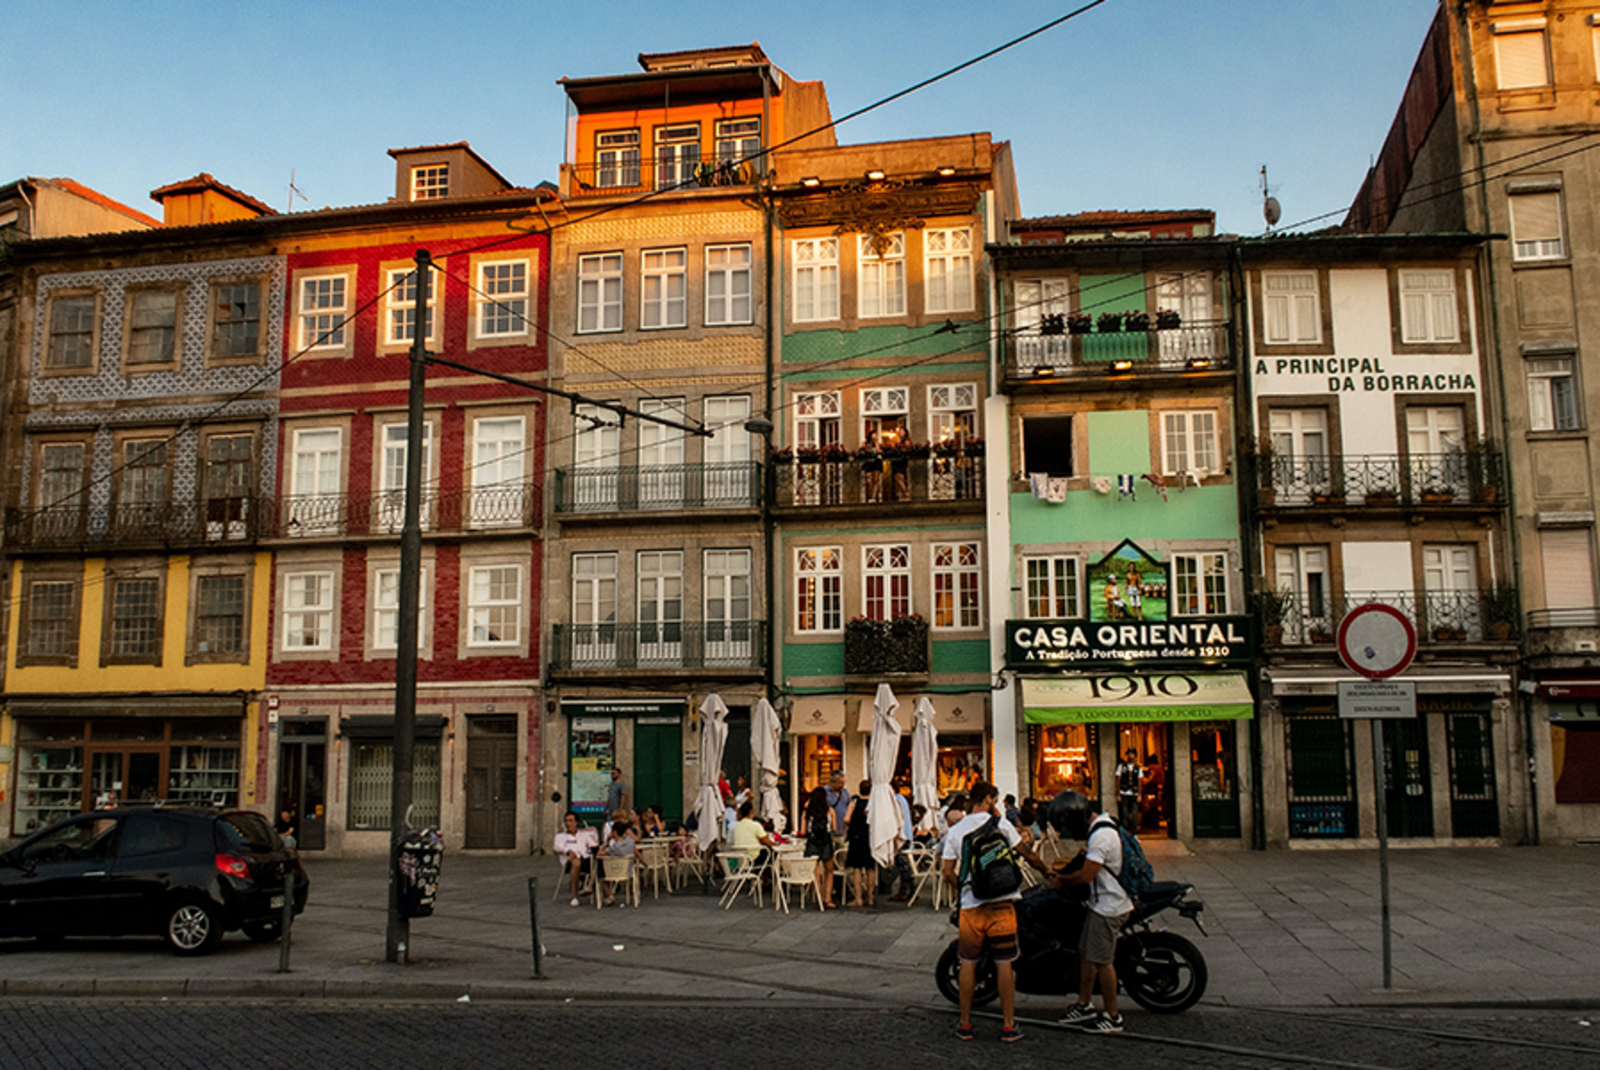 Buildings in Porto Portugal with red and green paint people out front eating with white umbrellas at sunset